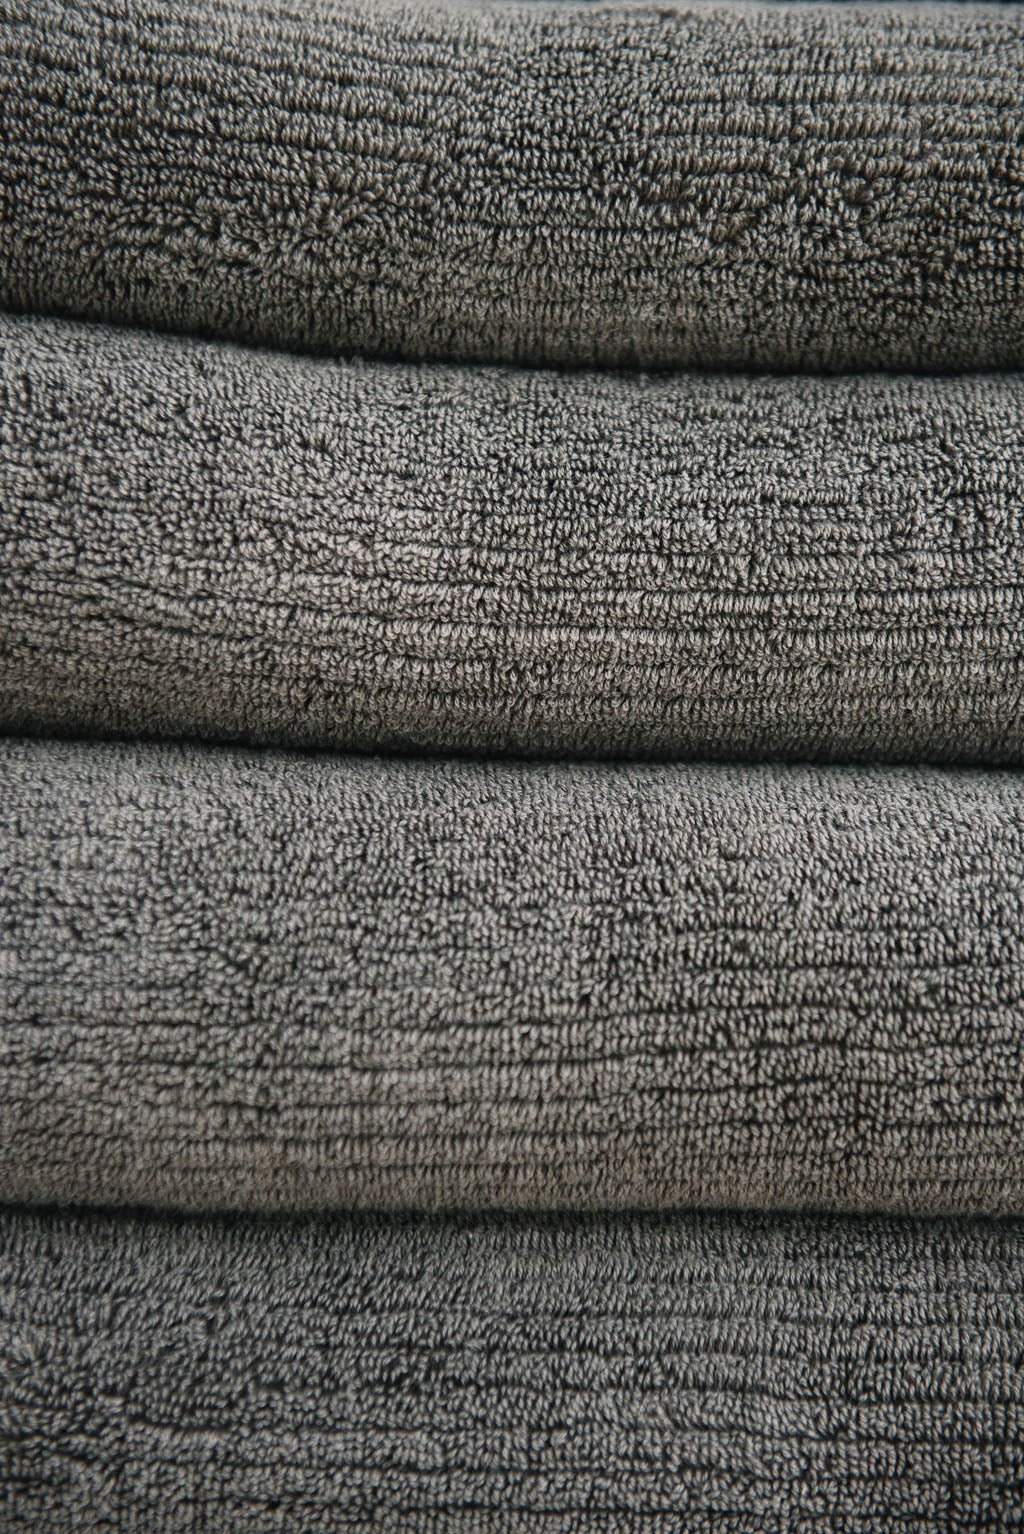 Ribbed Terry Bath Sheets in the color Charcoal. Photo of product taken up close. 